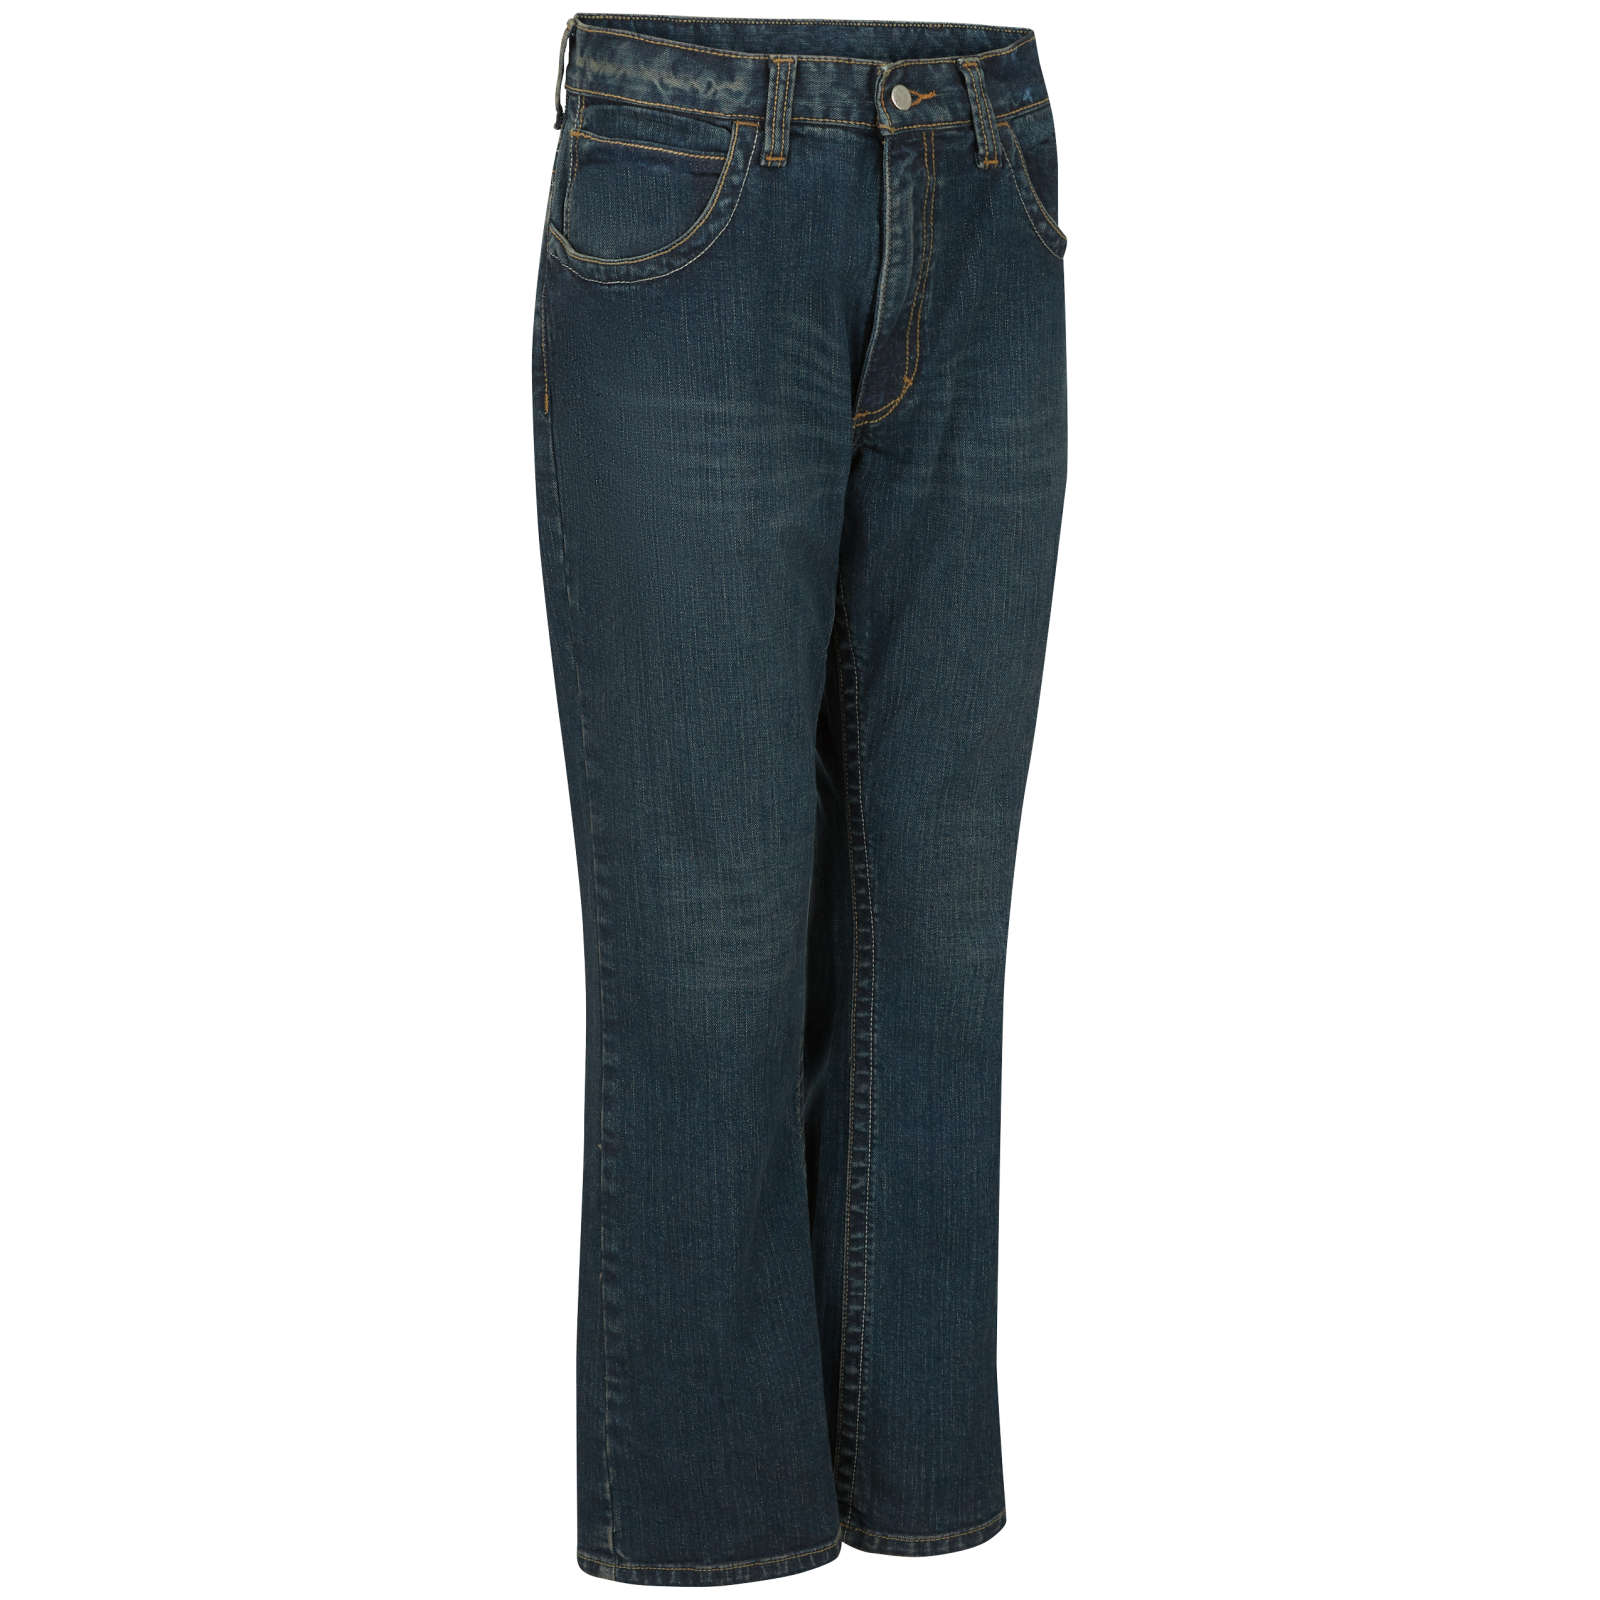 men's relaxed fit stretch jeans